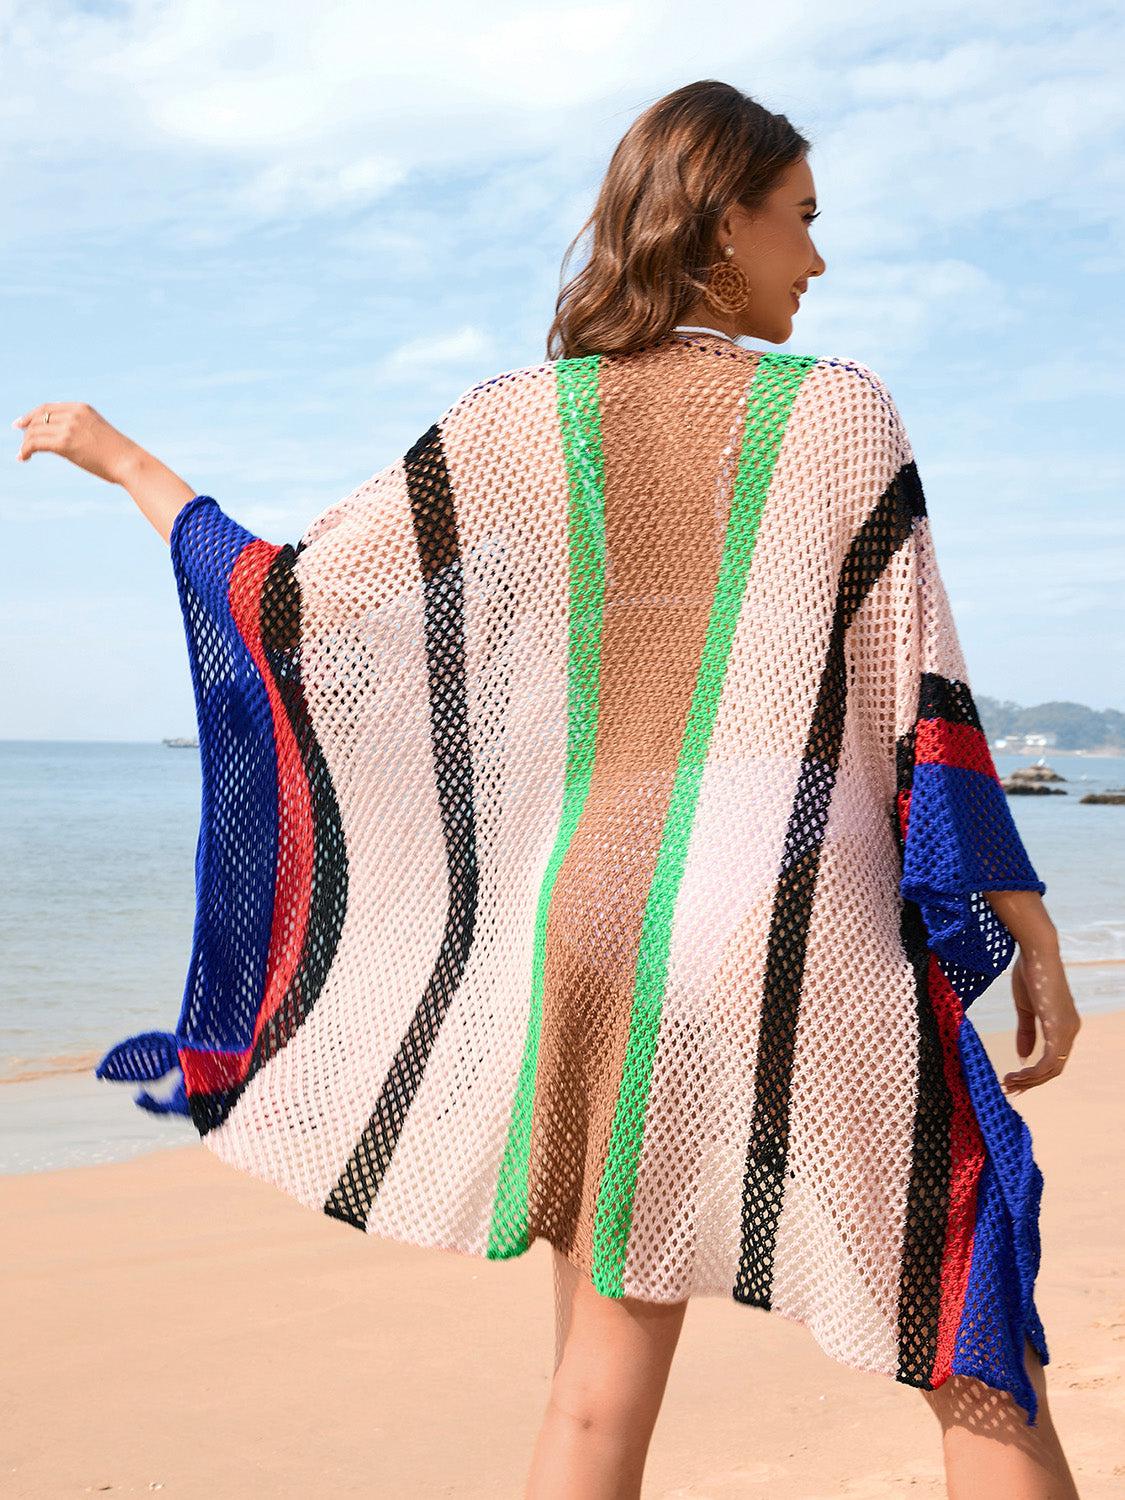 a woman walking on a beach with a colorful cover up